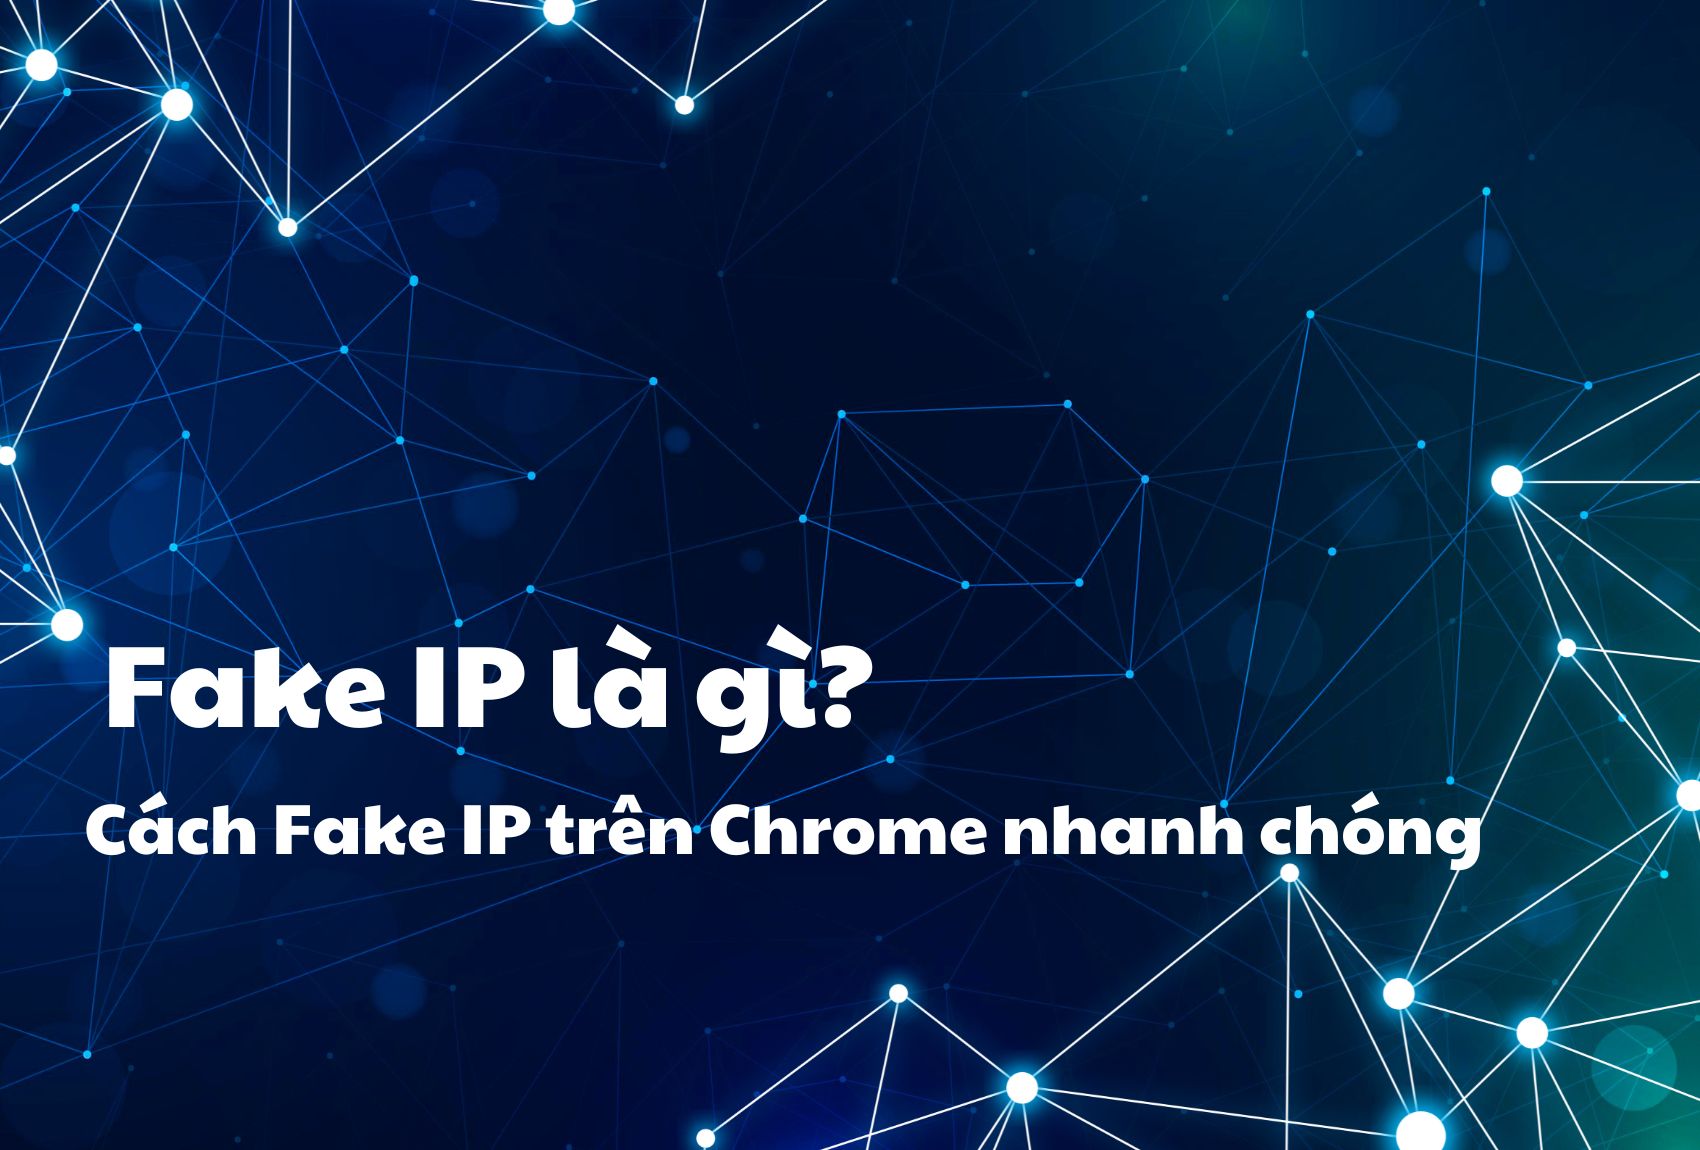 What is Fake IP? How to Fake IP on Chrome quickly